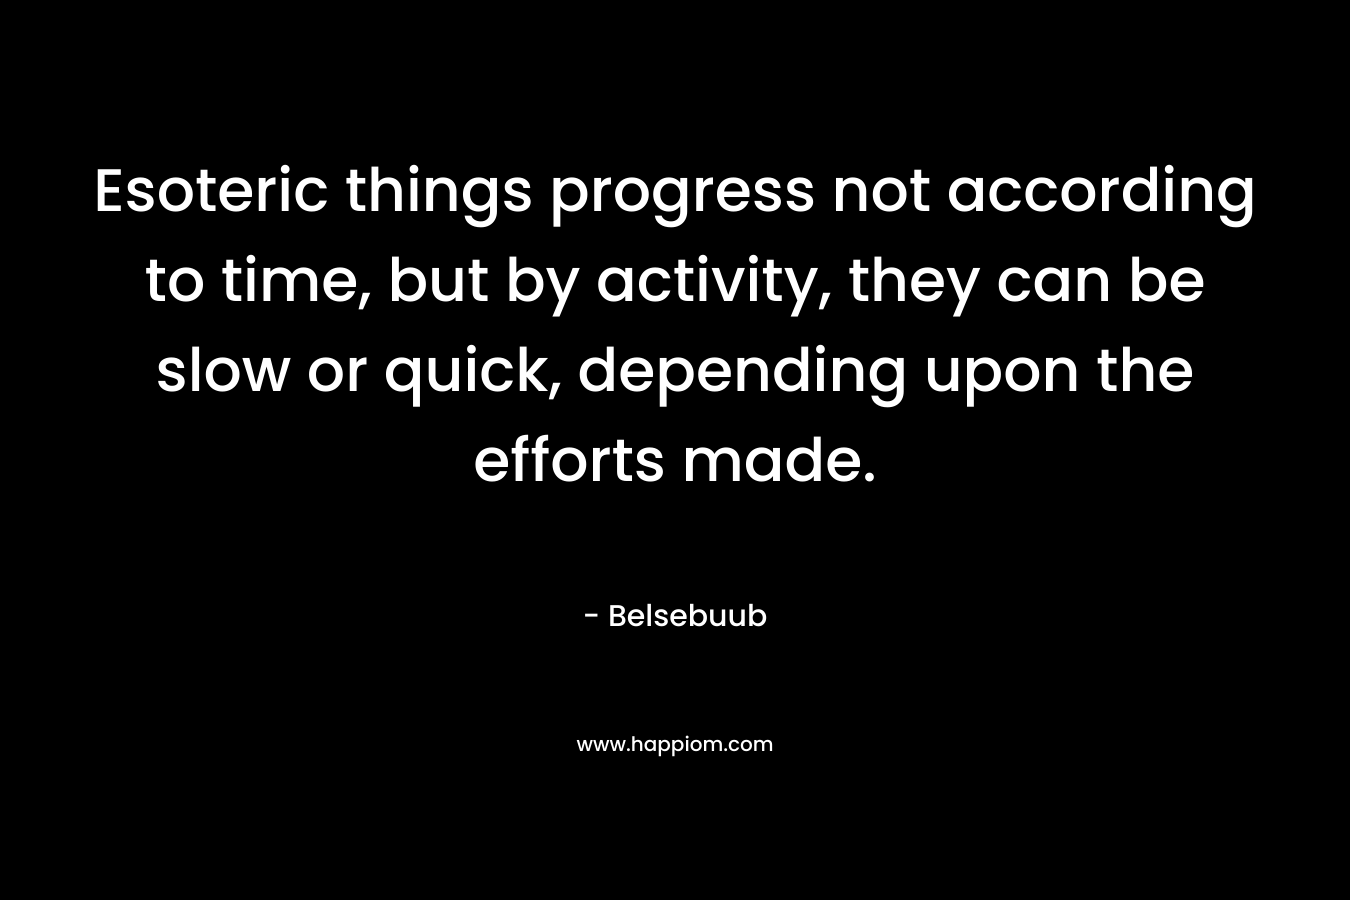 Esoteric things progress not according to time, but by activity, they can be slow or quick, depending upon the efforts made.